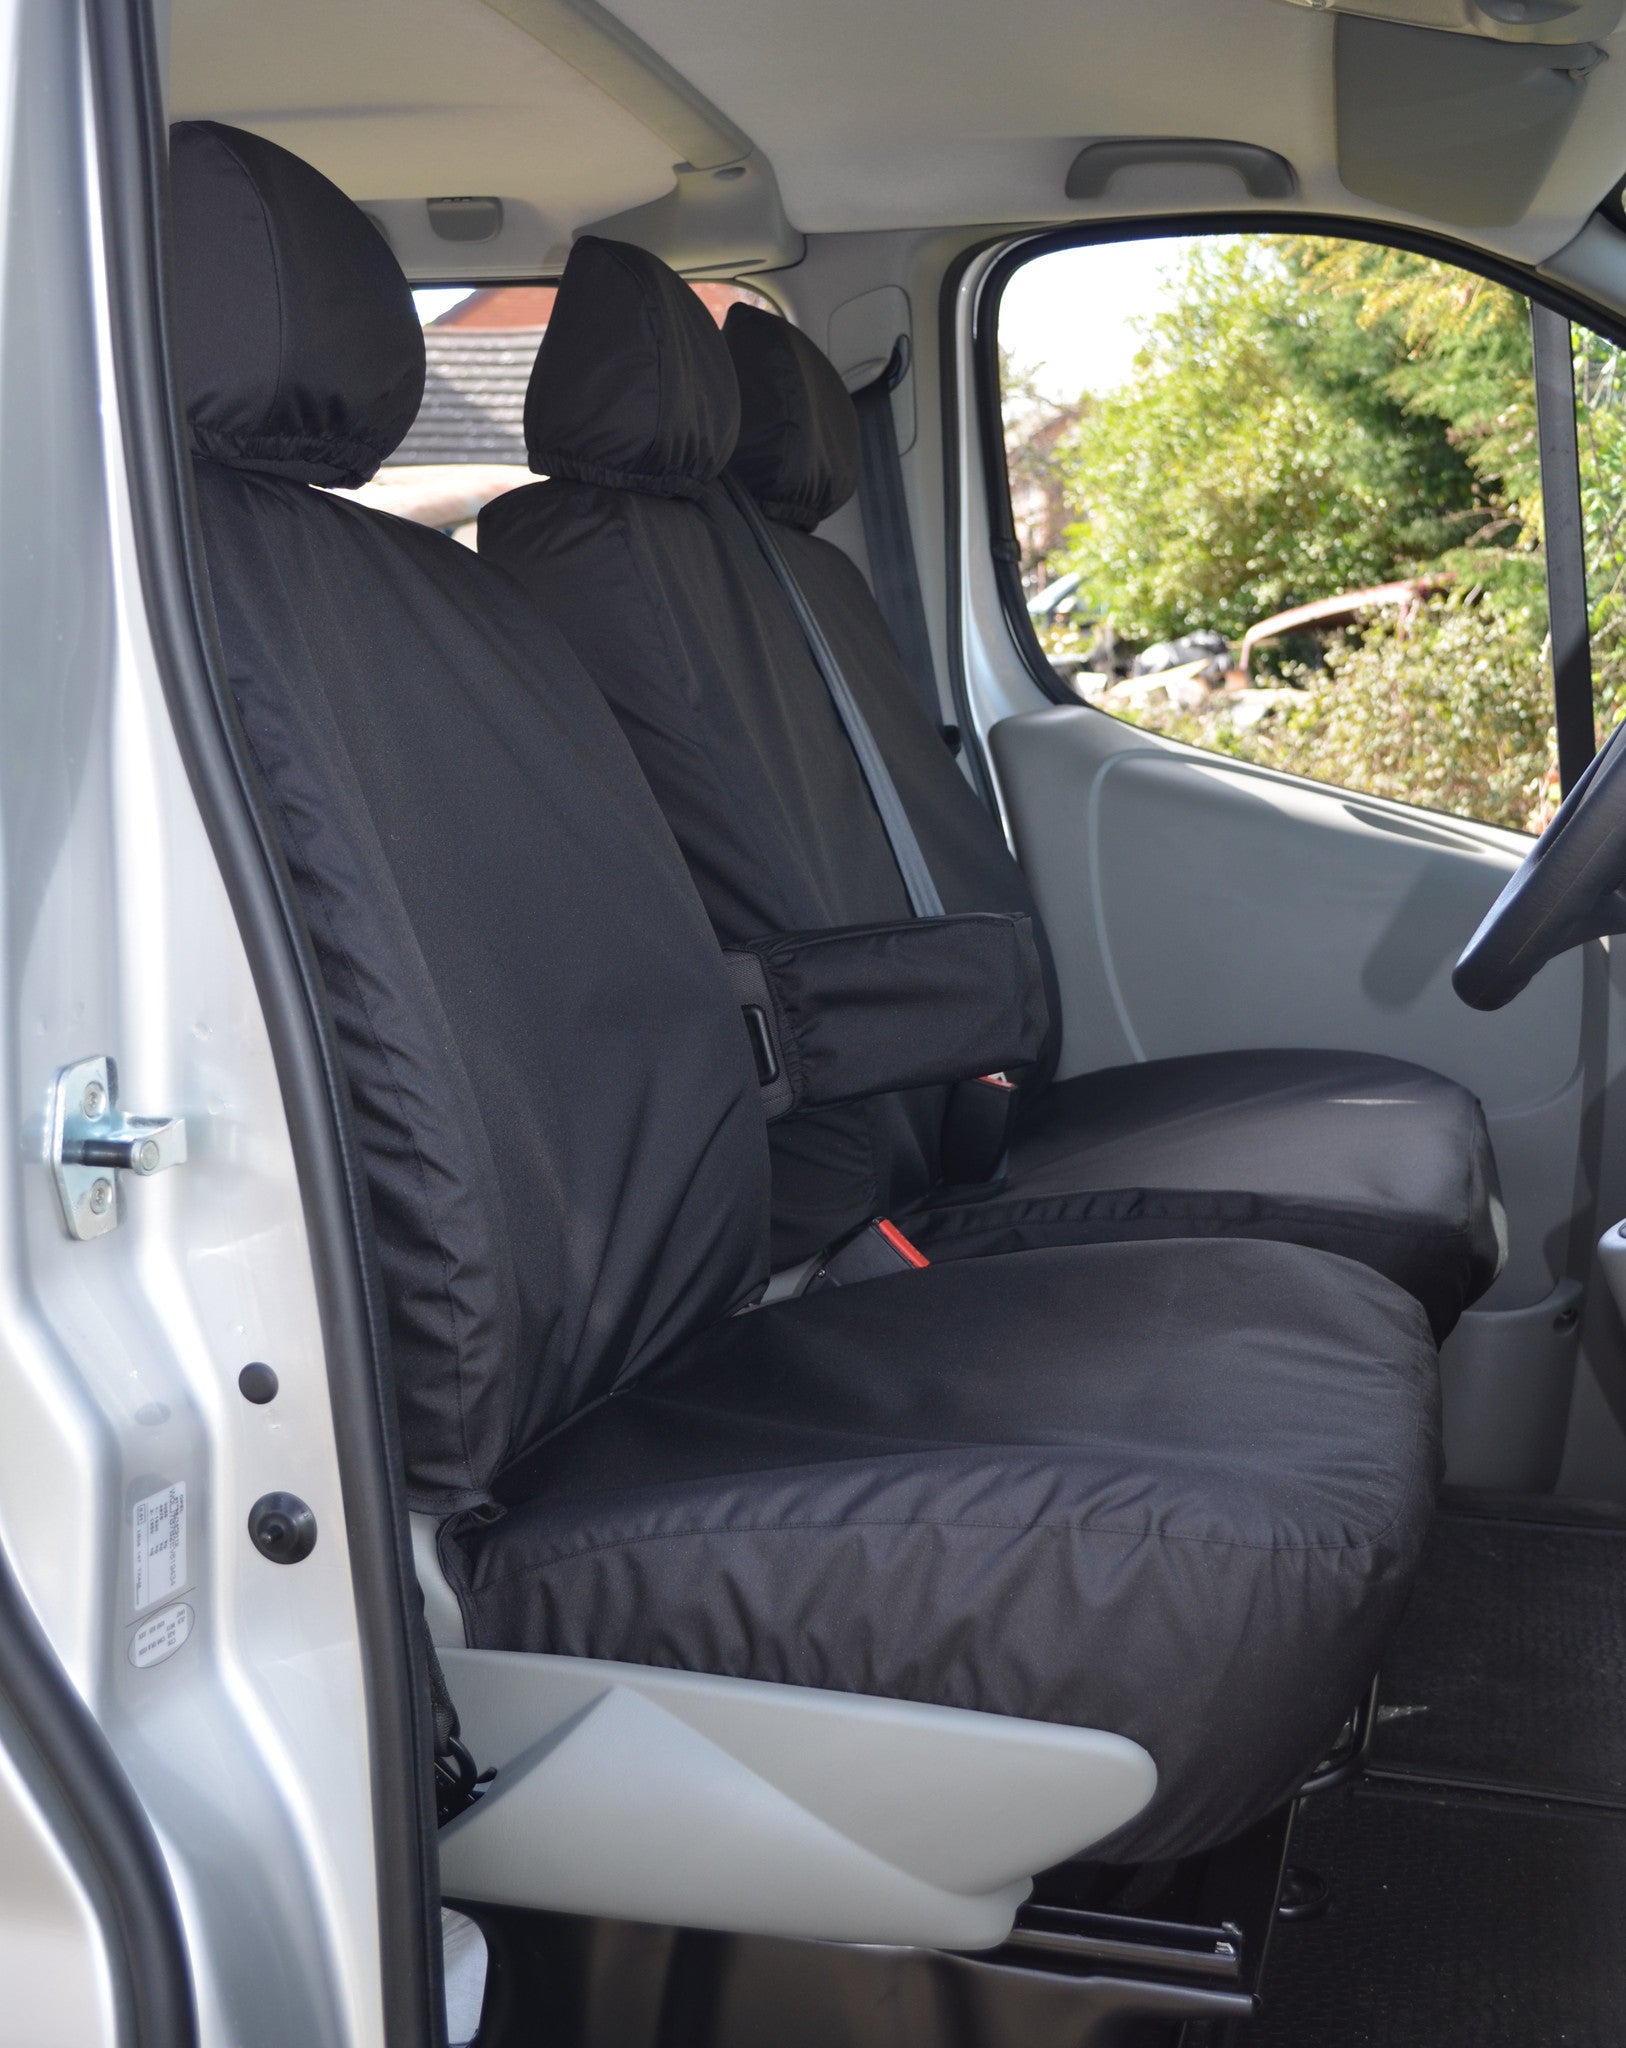 Renault Trafic 2006 - 2014 Tailored Front Seat Covers Black / With Driver's Armrest Turtle Covers Ltd